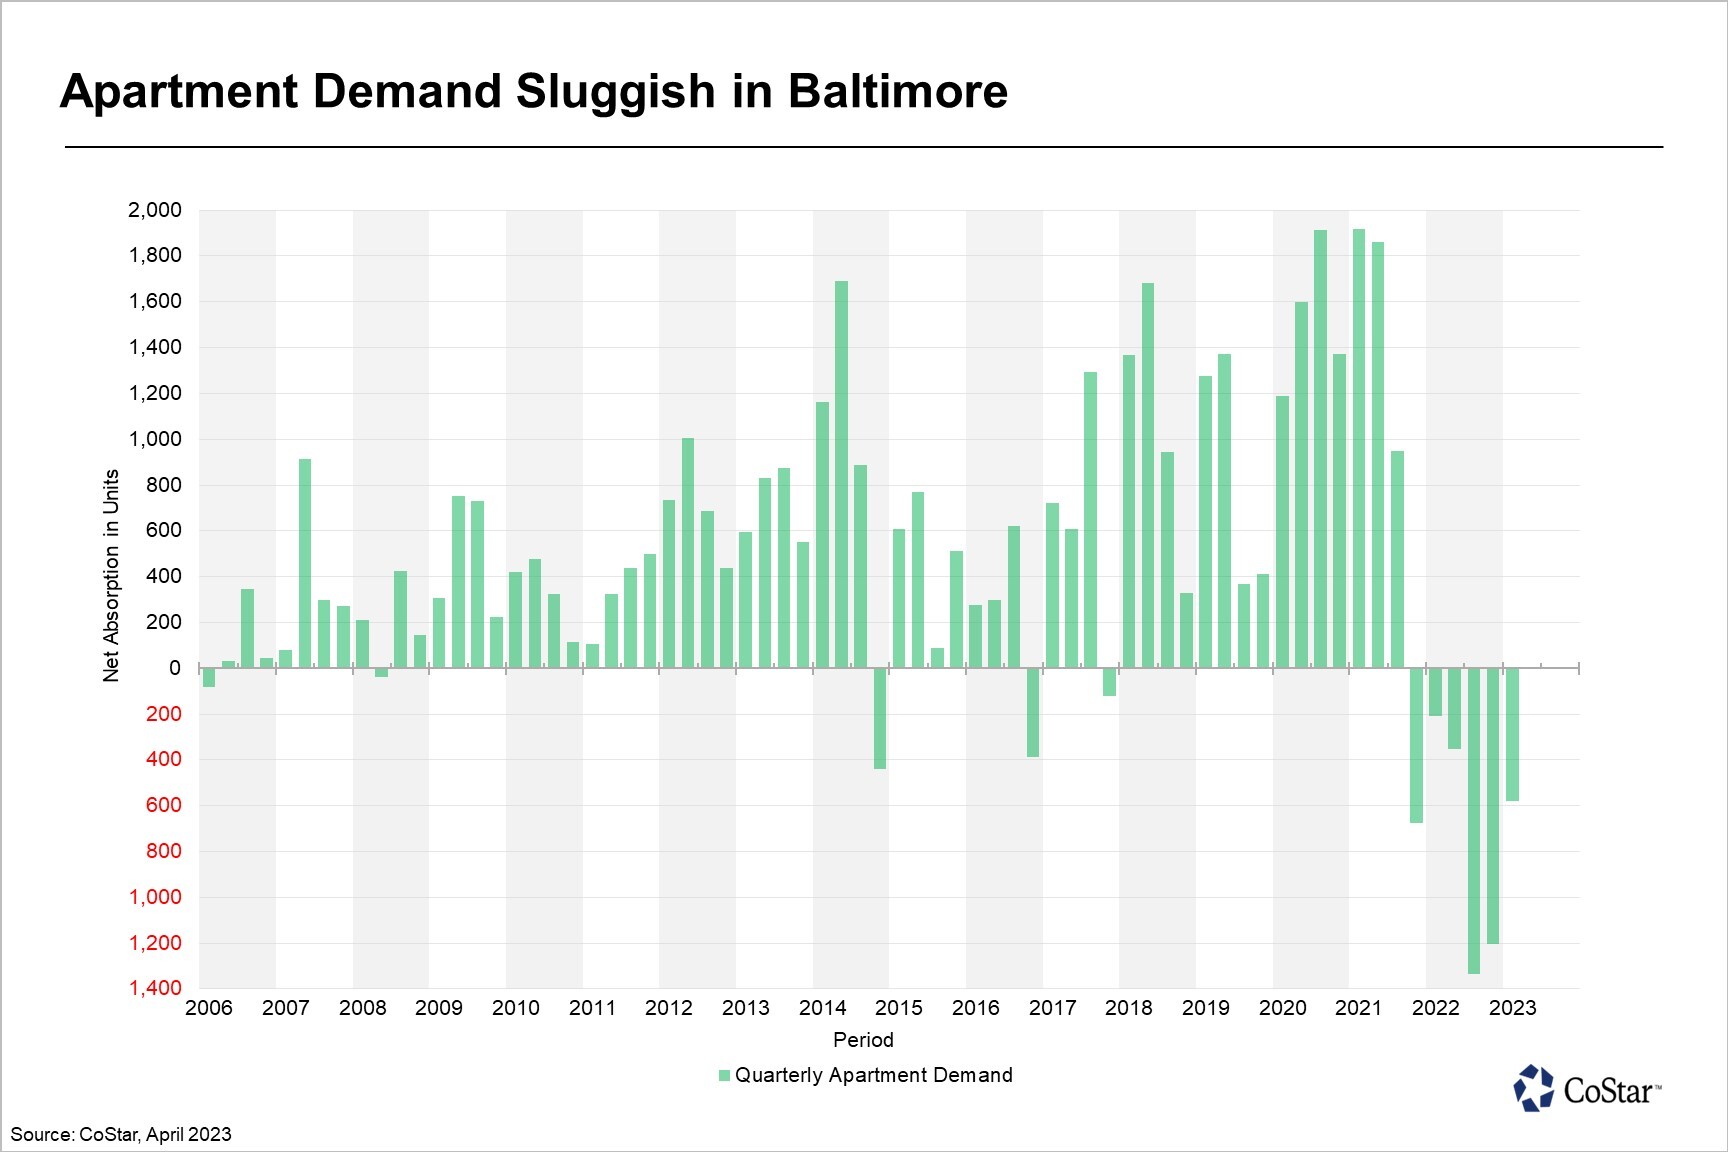 Multifamily demand in Baltimore has slumped since late 2021, which is in stark contrast to the all-time highs registered in 2020 and early 2021.